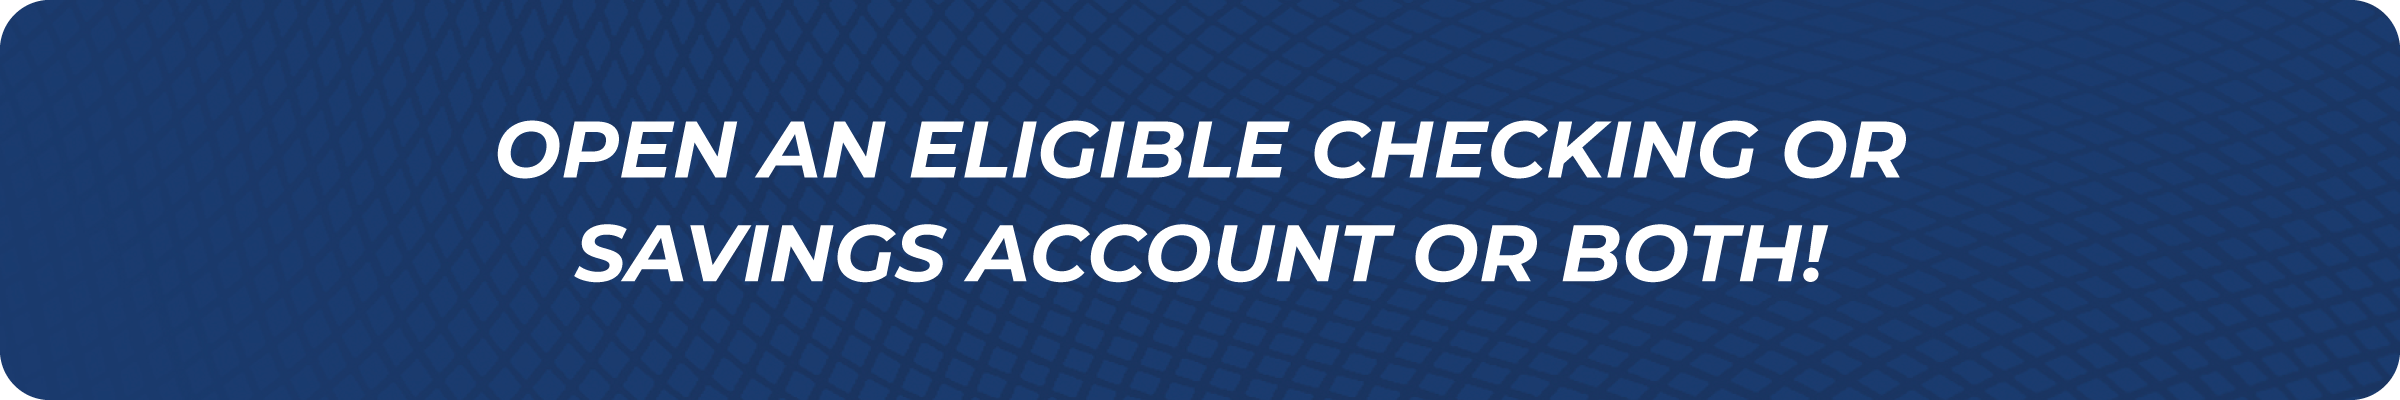 Open an eligible checking or savings account or both!